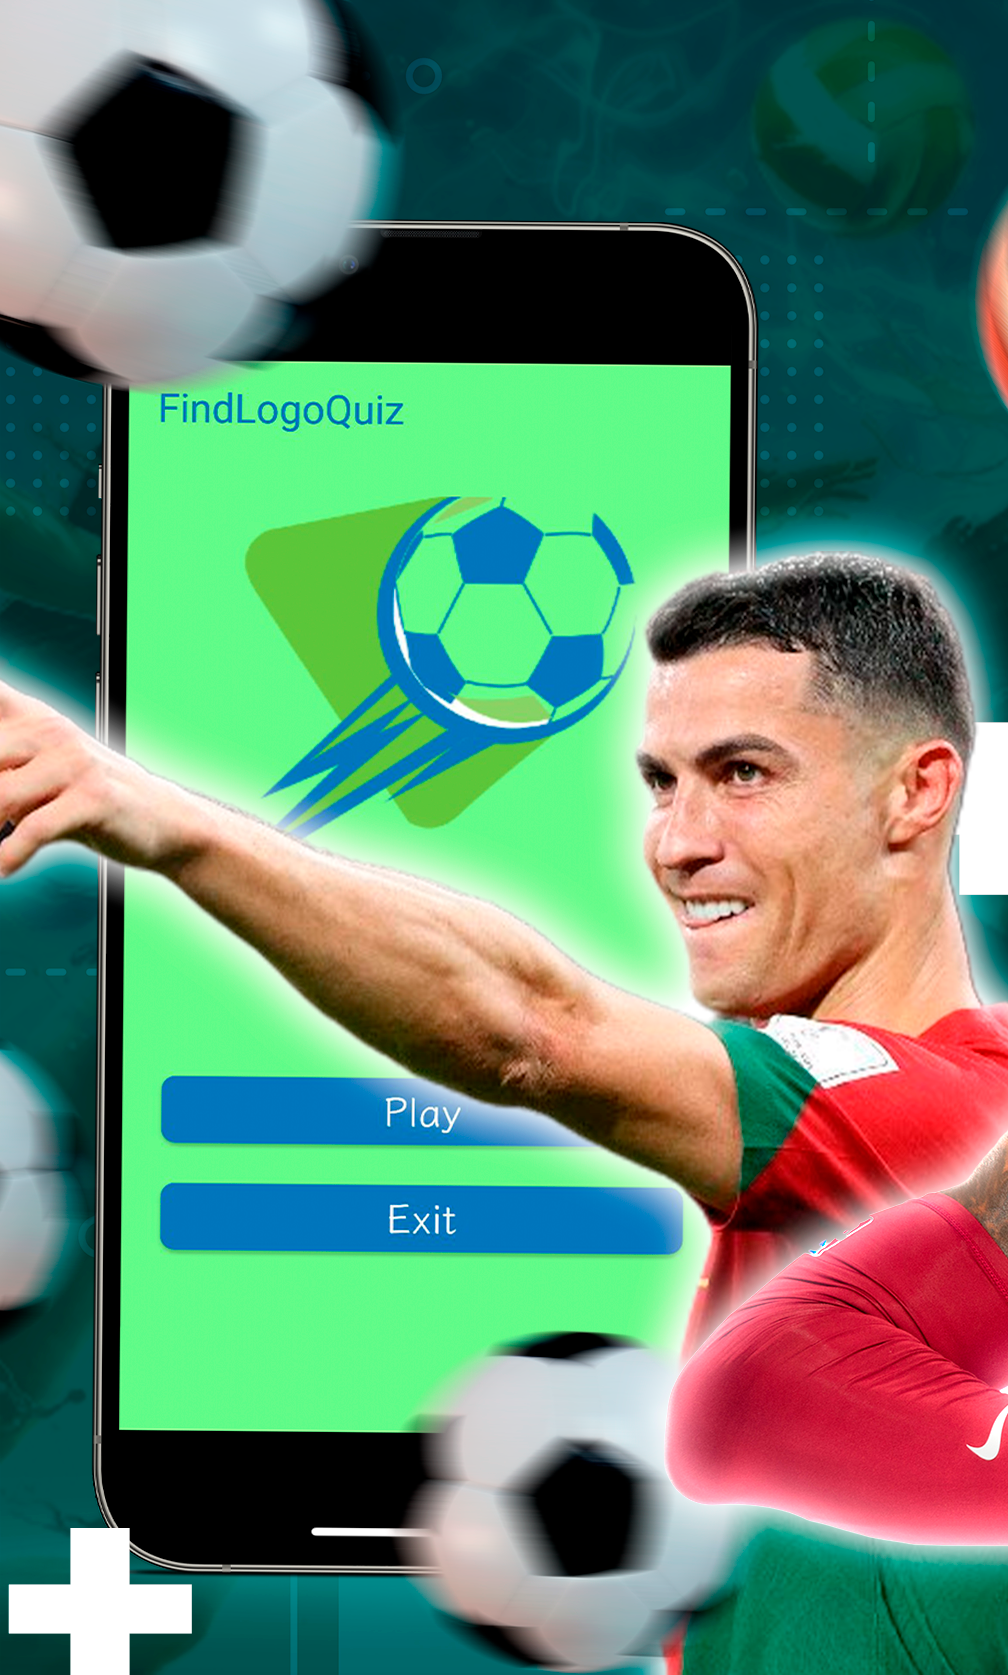 Guess the football club! - APK Download for Android